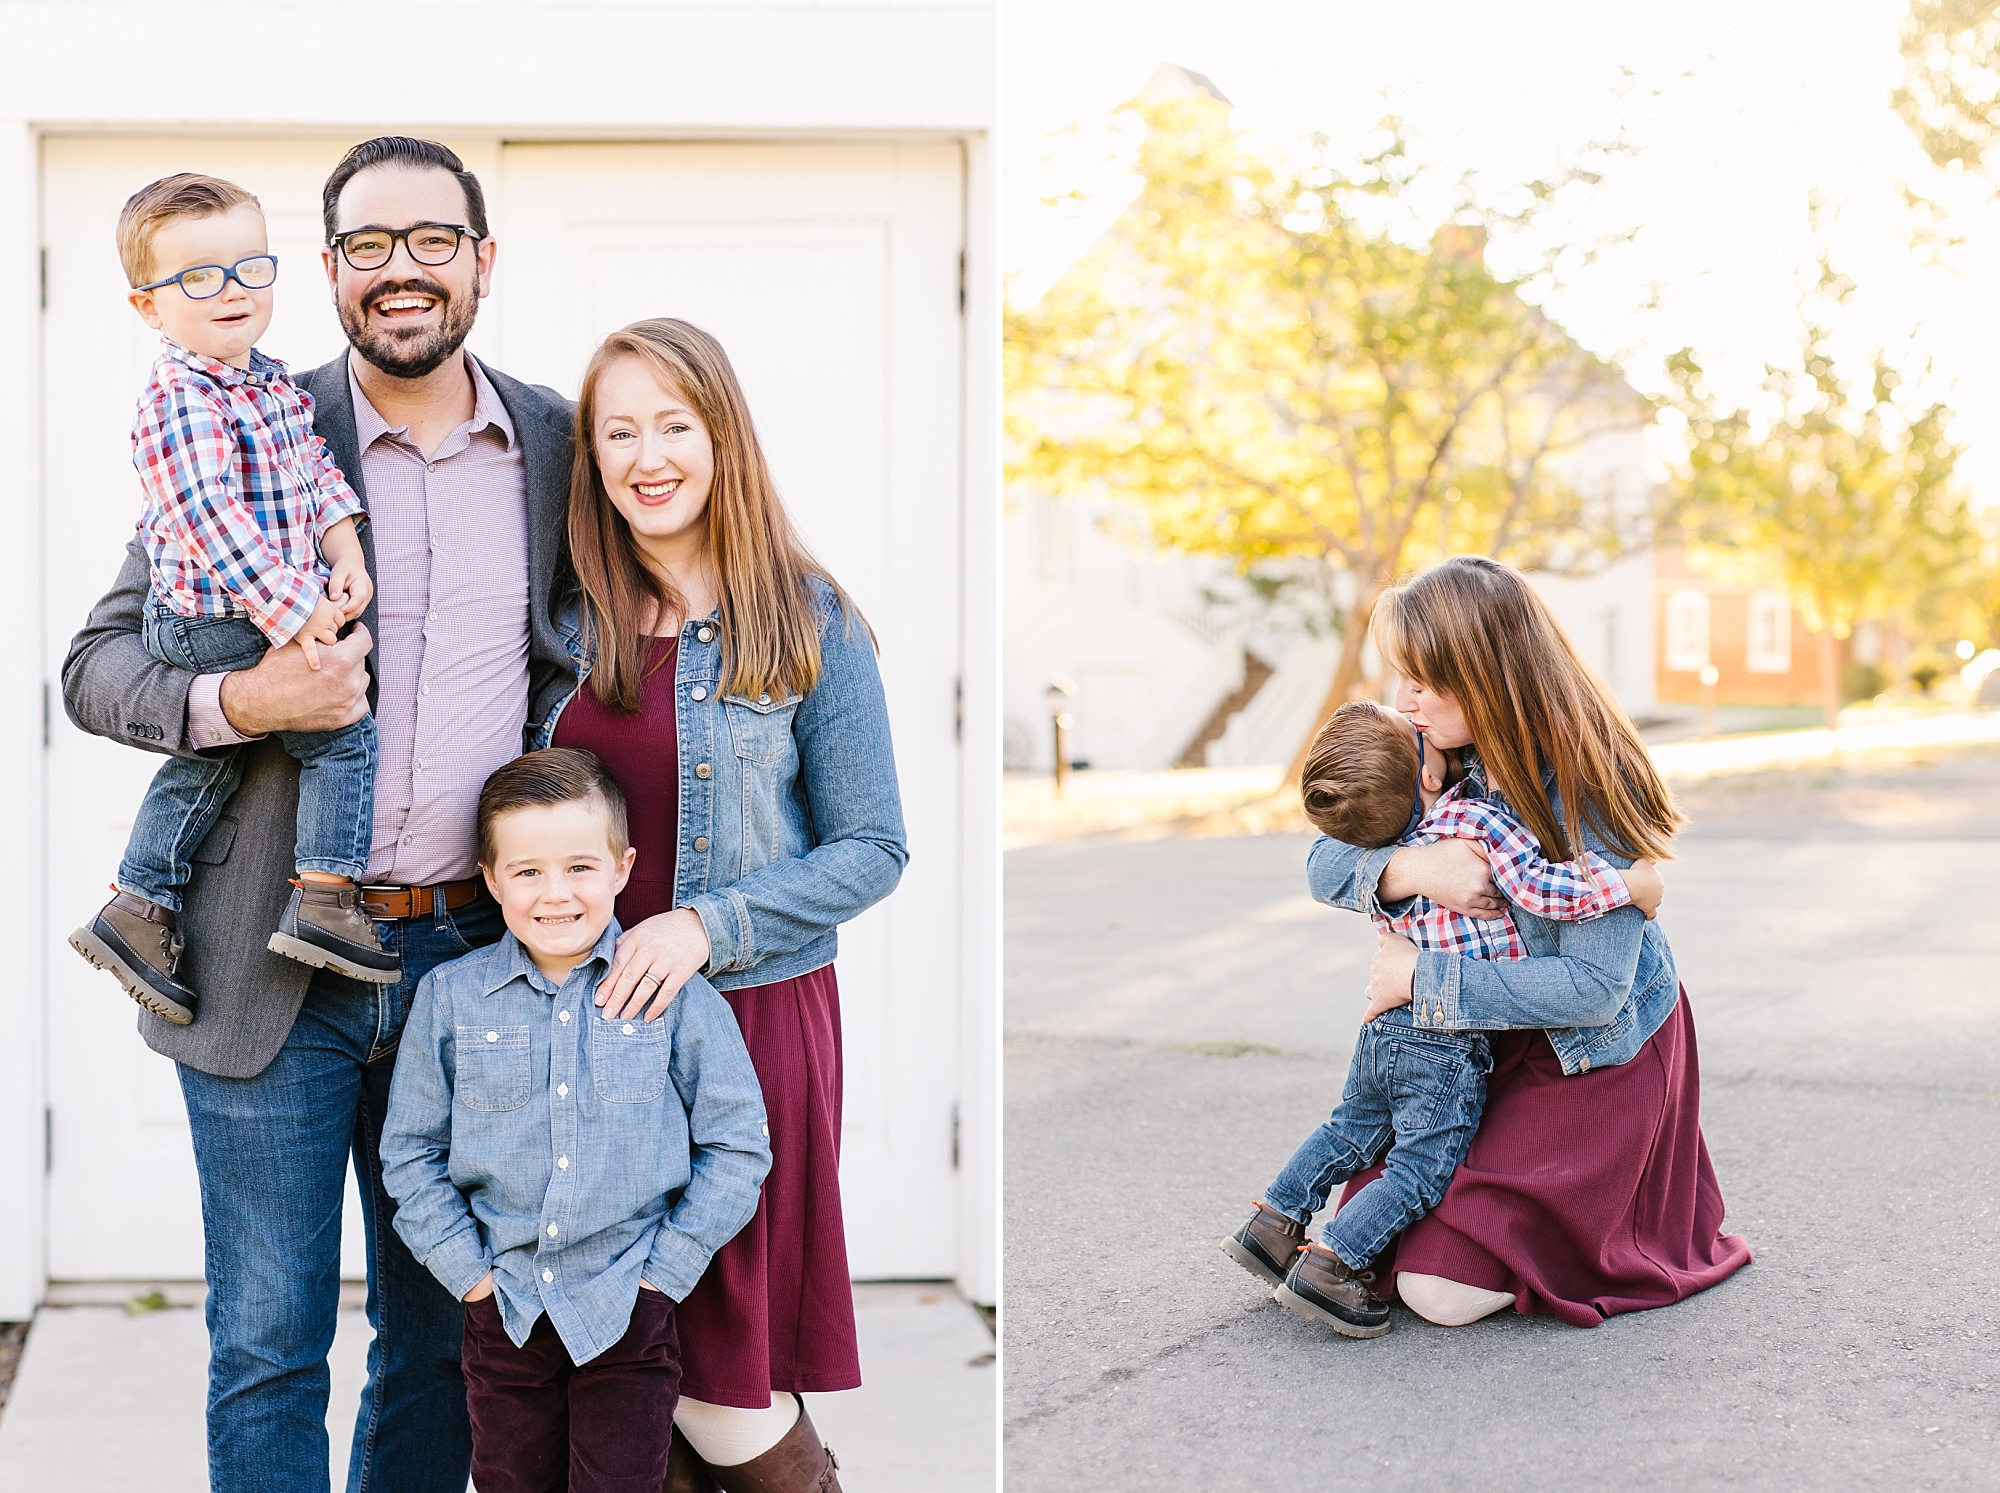 Coordinating your fall family session outfits